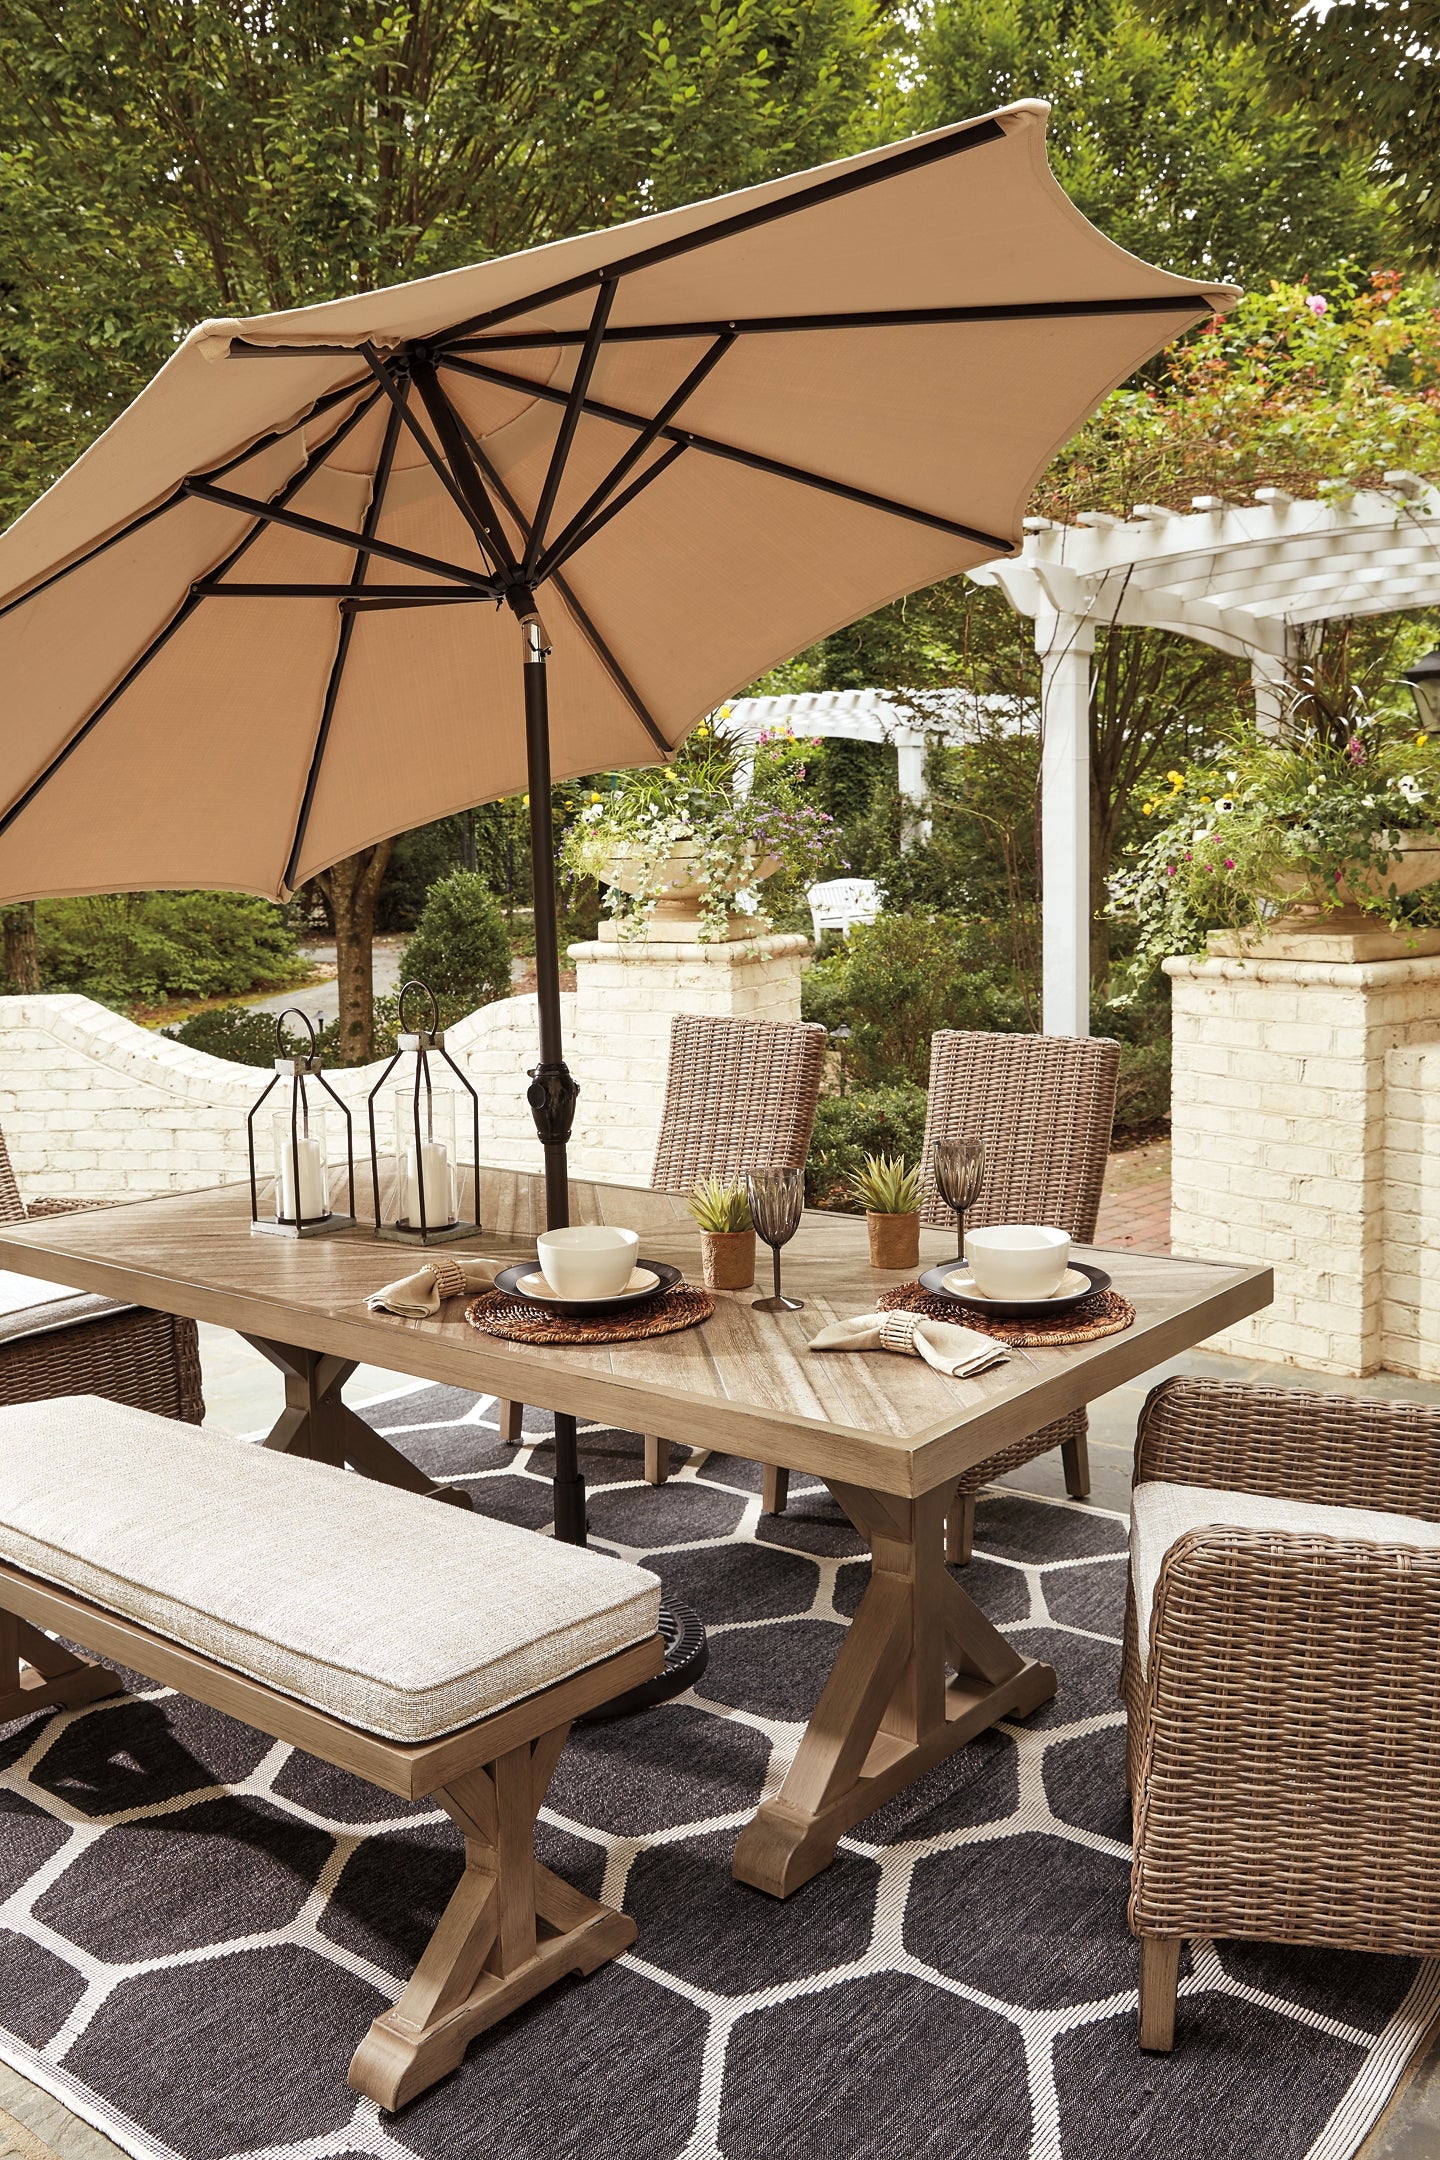 Beachcroft Outdoor Dining Table and 4 Chairs and Bench Wilson Furniture (OH)  in Bridgeport, Ohio. Serving Bridgeport, Yorkville, Bellaire, & Avondale